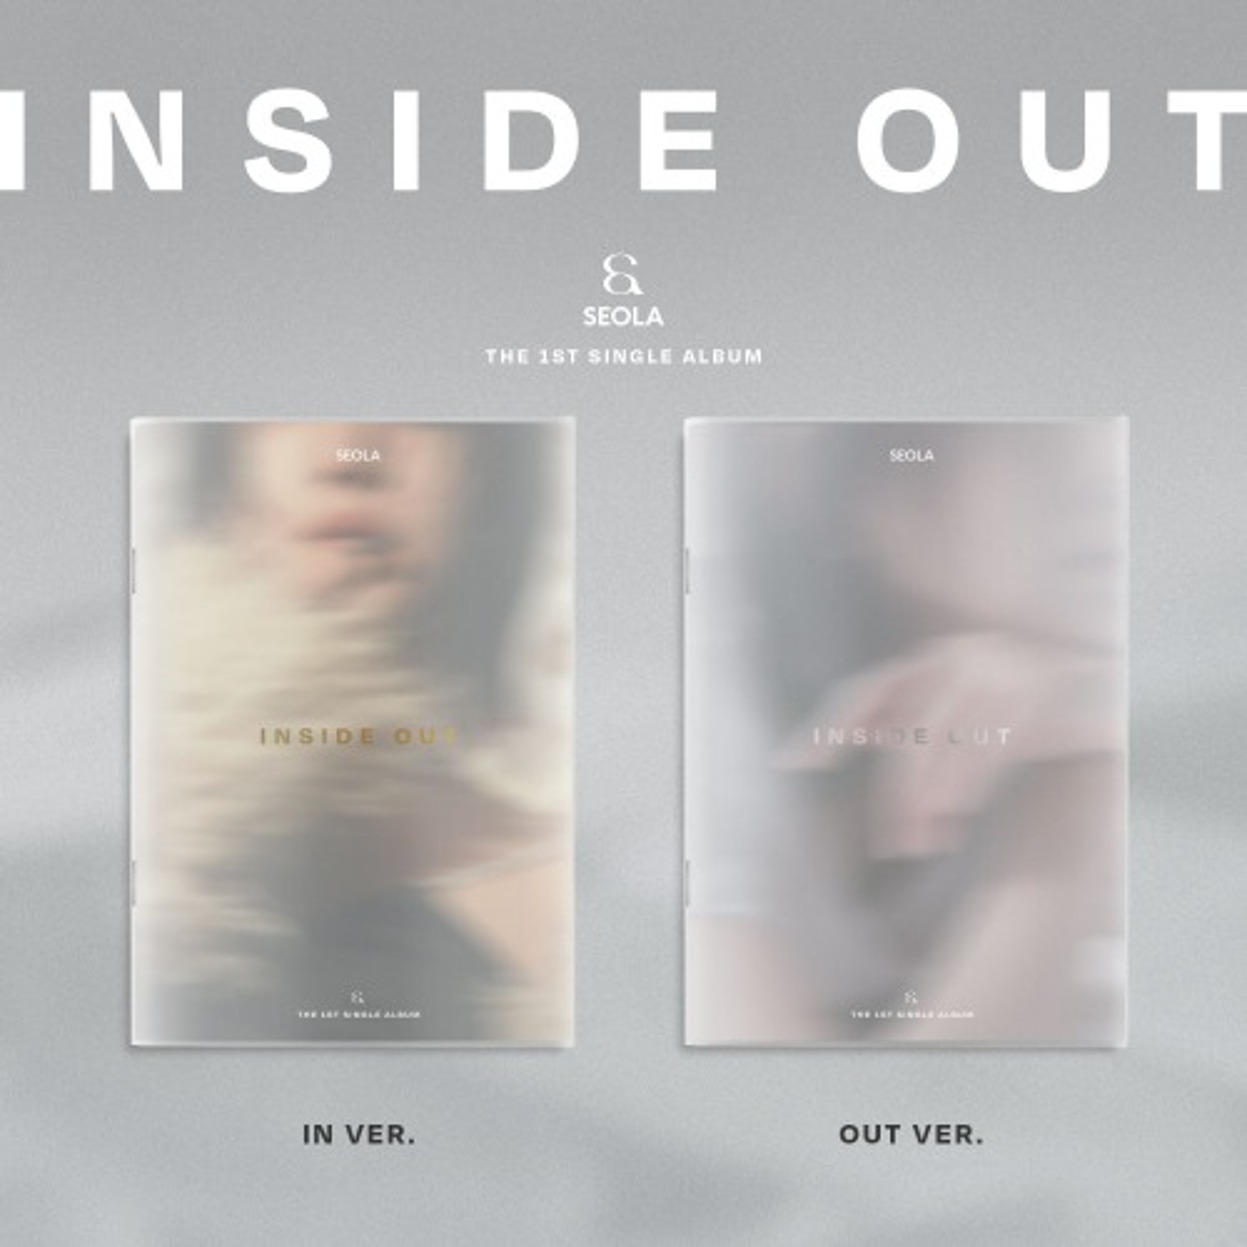 SEOLA(설아) - THE 1ST SINGLE ALBUM [INSIDE OUT] (IN VER. / OUT VER.) [랜덤버전]